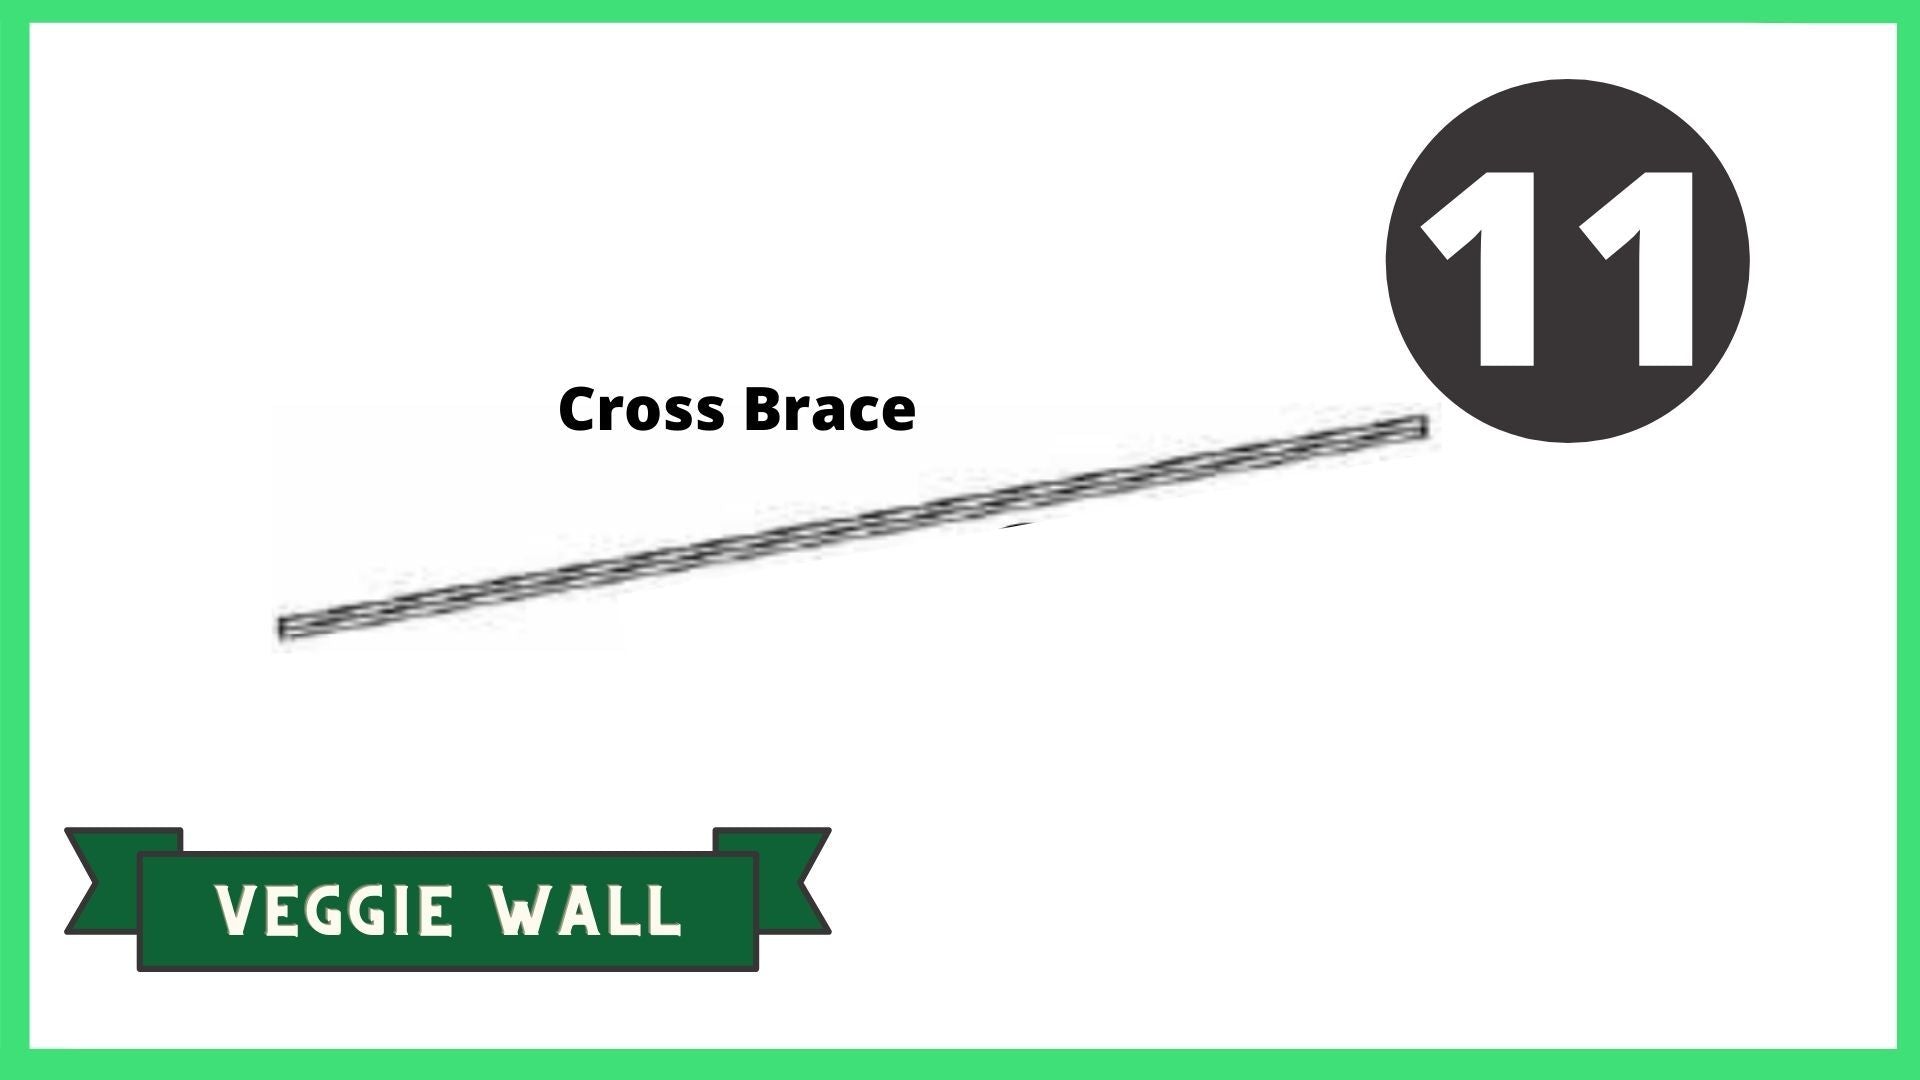 z-REPLACEMENT PARTS: Stack & Extend Veggie Wall Accessories Frame It All Part # 11 - Cross Brace 